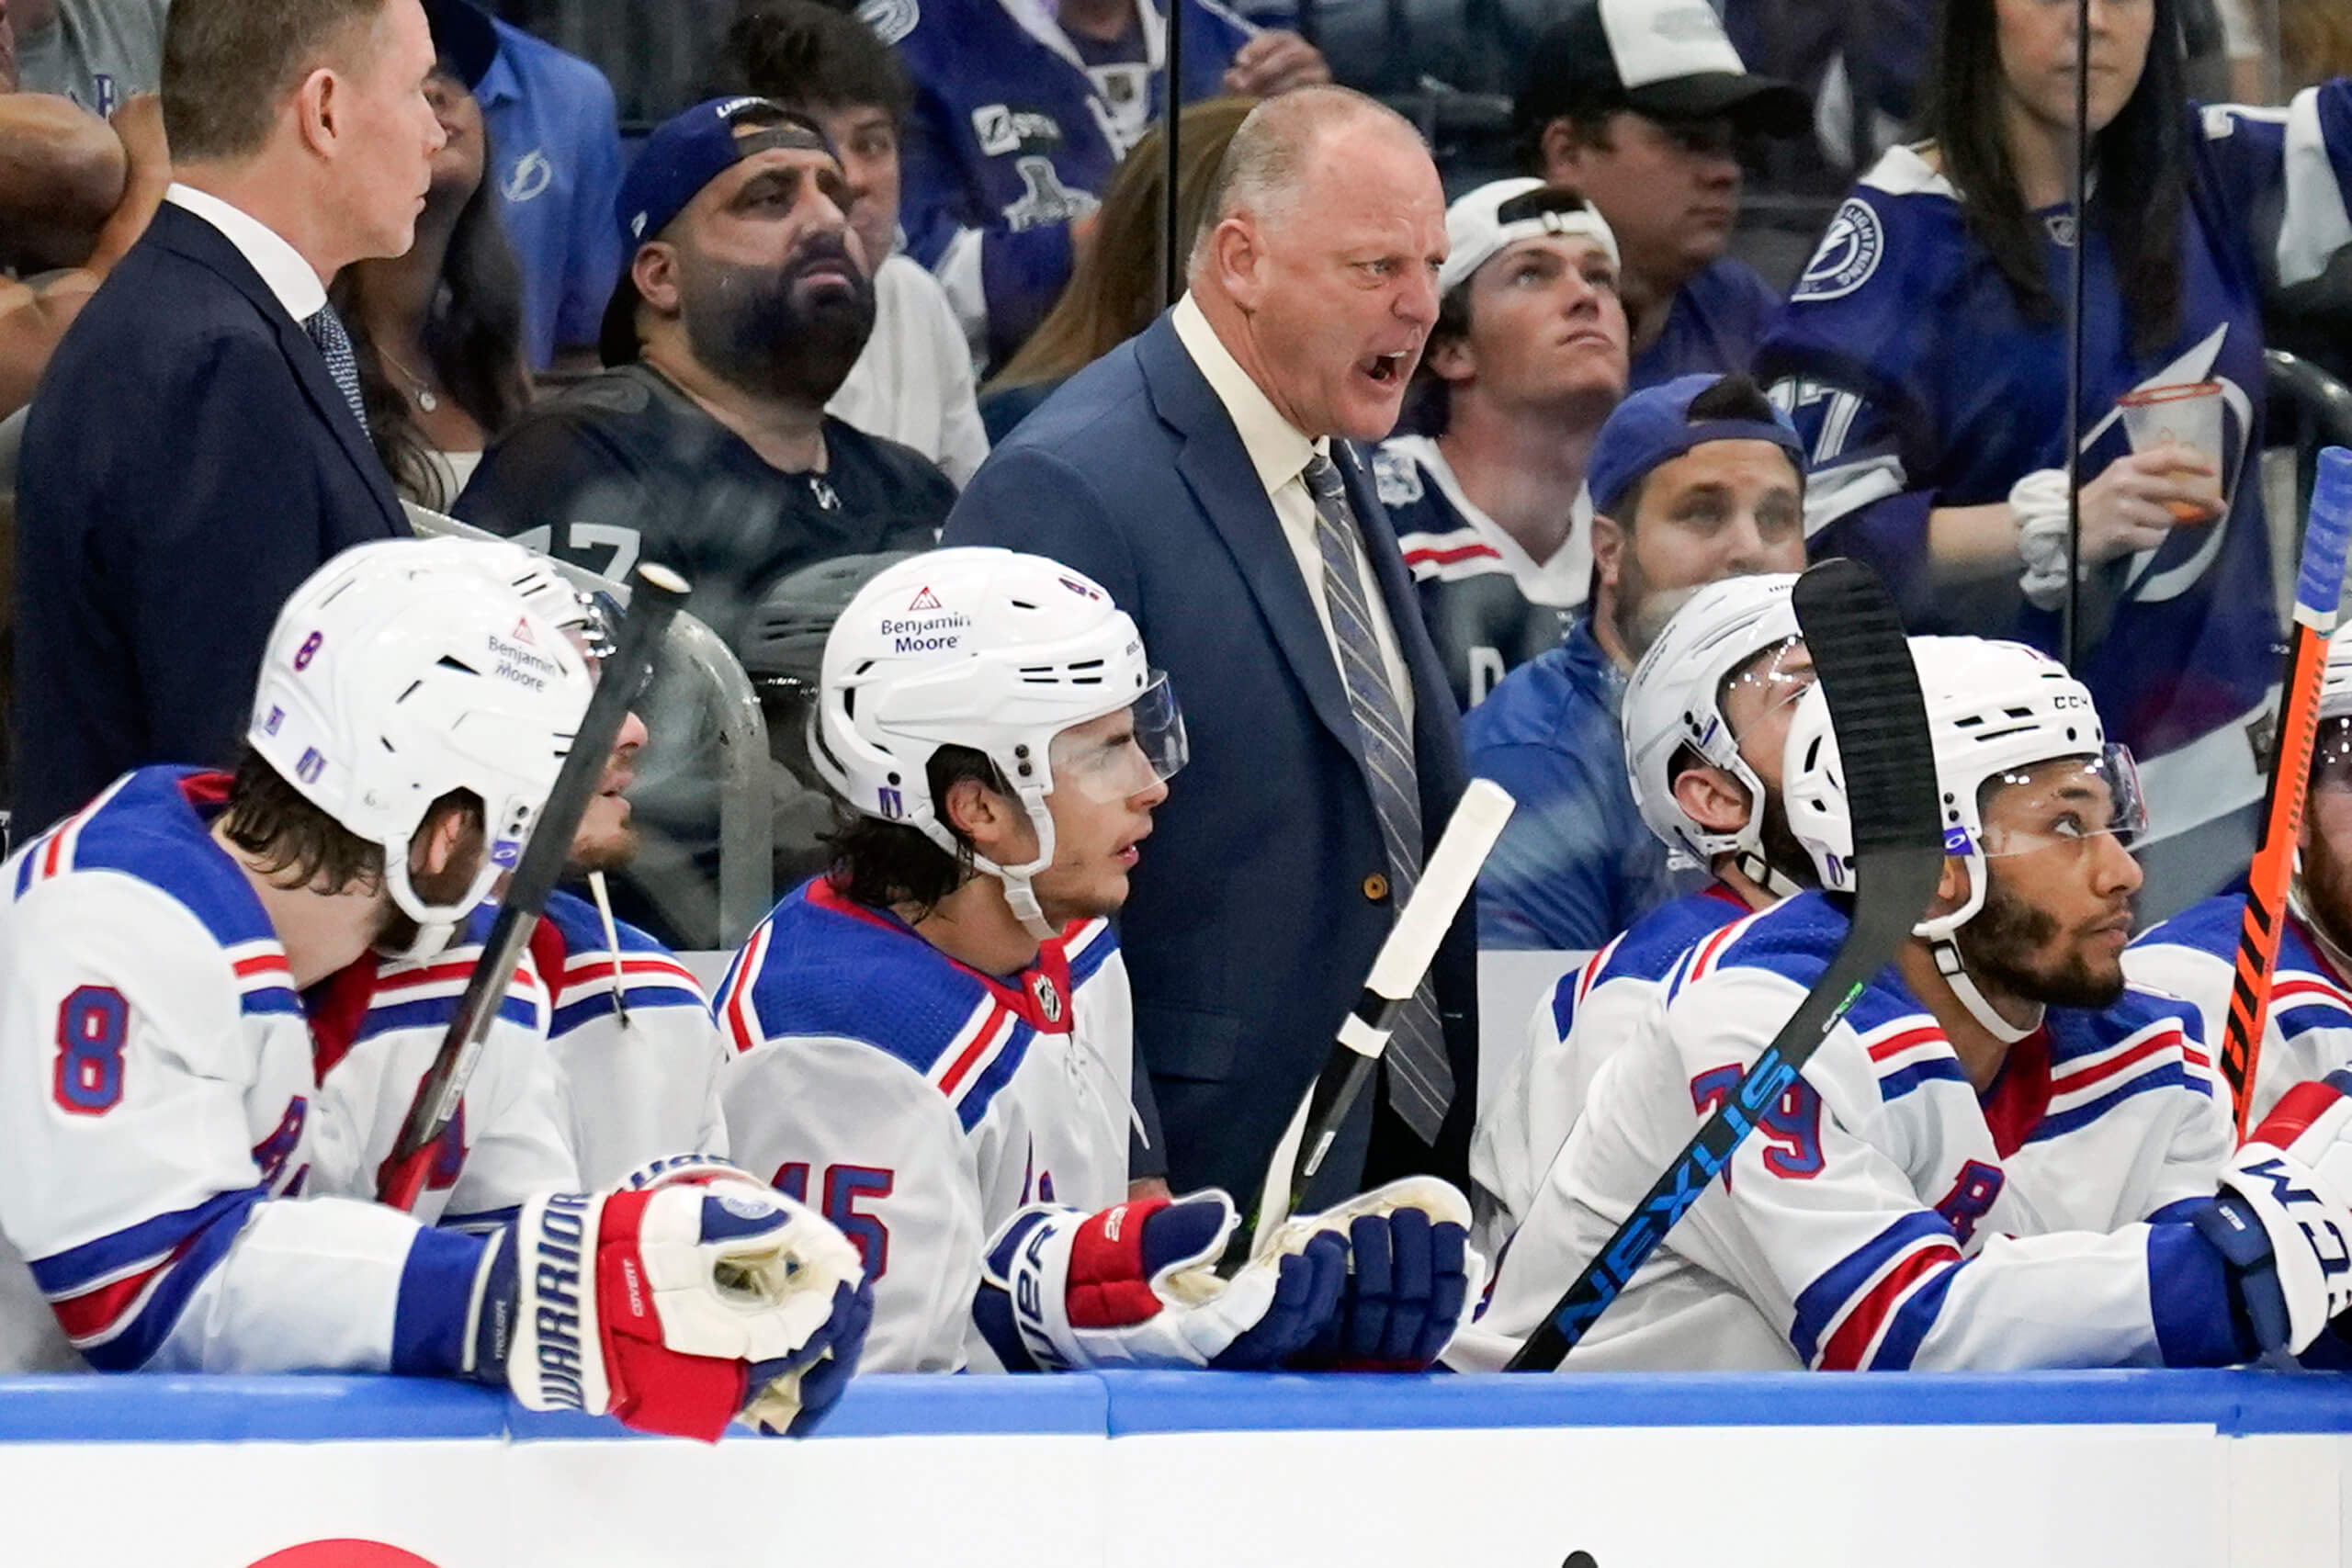 Chris Drury “likes the makeup” of playoff-ready Rangers after